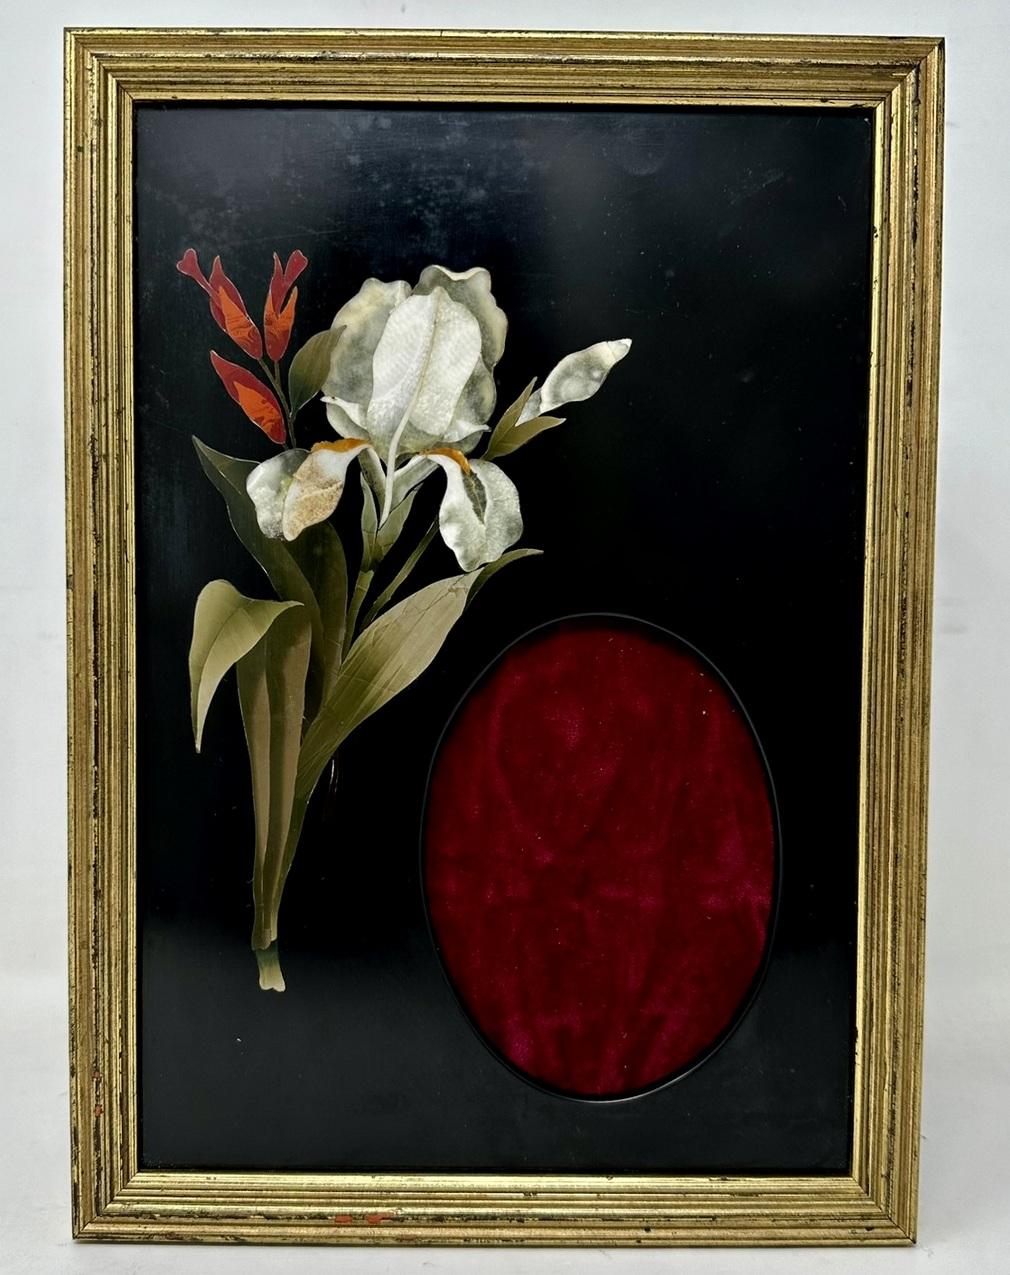 A Superb Pietra Dura Highly Decorative Hanging Photograph Frame within a reeded giltwood surround, of exceptional quality and Italian origin, early to mid-Nineteenth Century. 

Finely inlaid with a single upright flowering Iris in colours of white